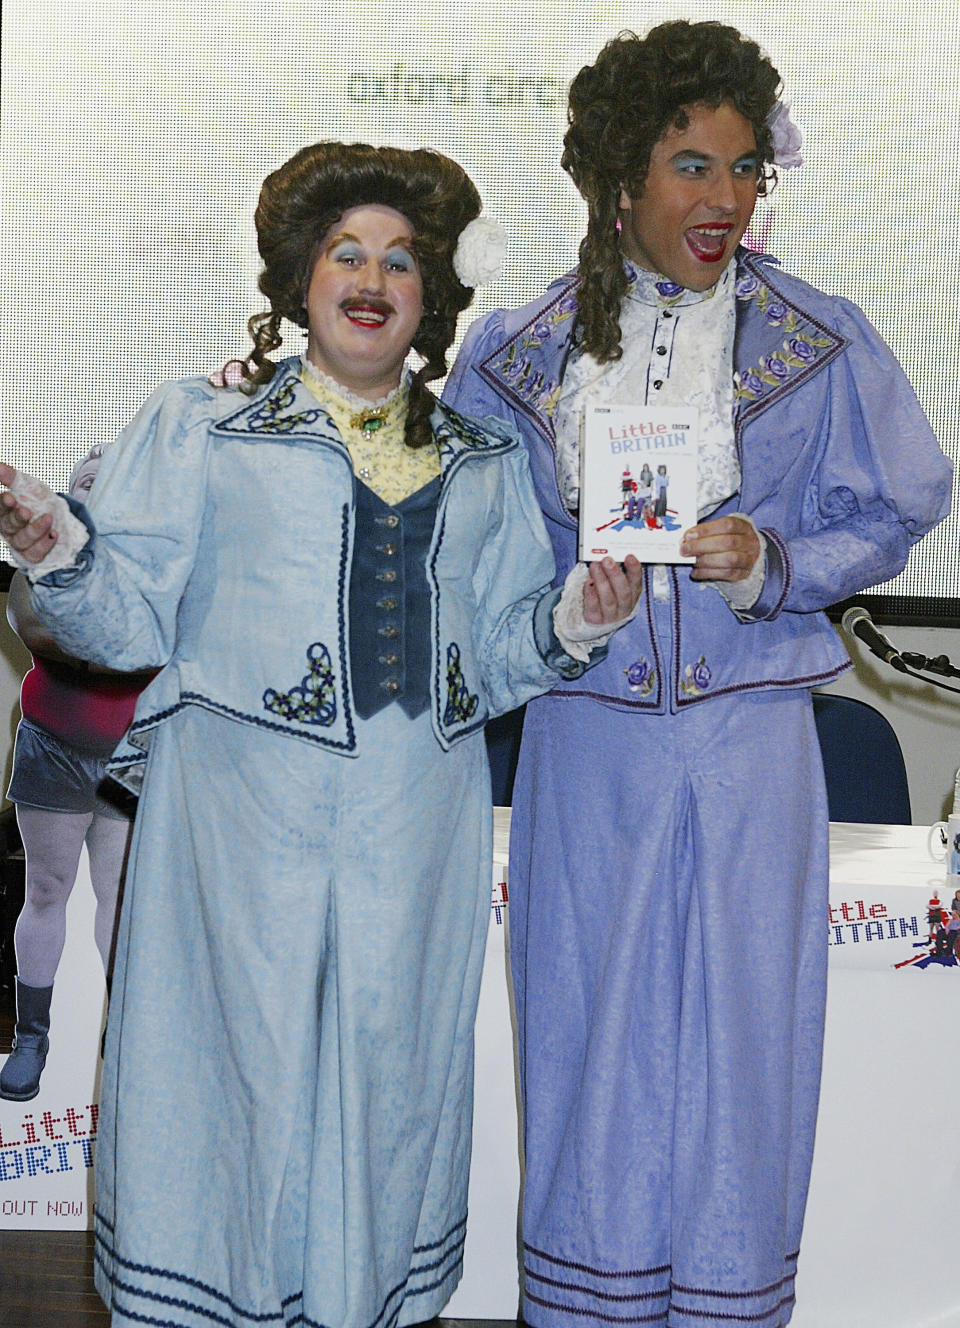 Matt Lucas and David Walliams played ethnic minority characters on their shows as well as members of other marginalised groups. (Photo by Jo Hale/Getty Images)